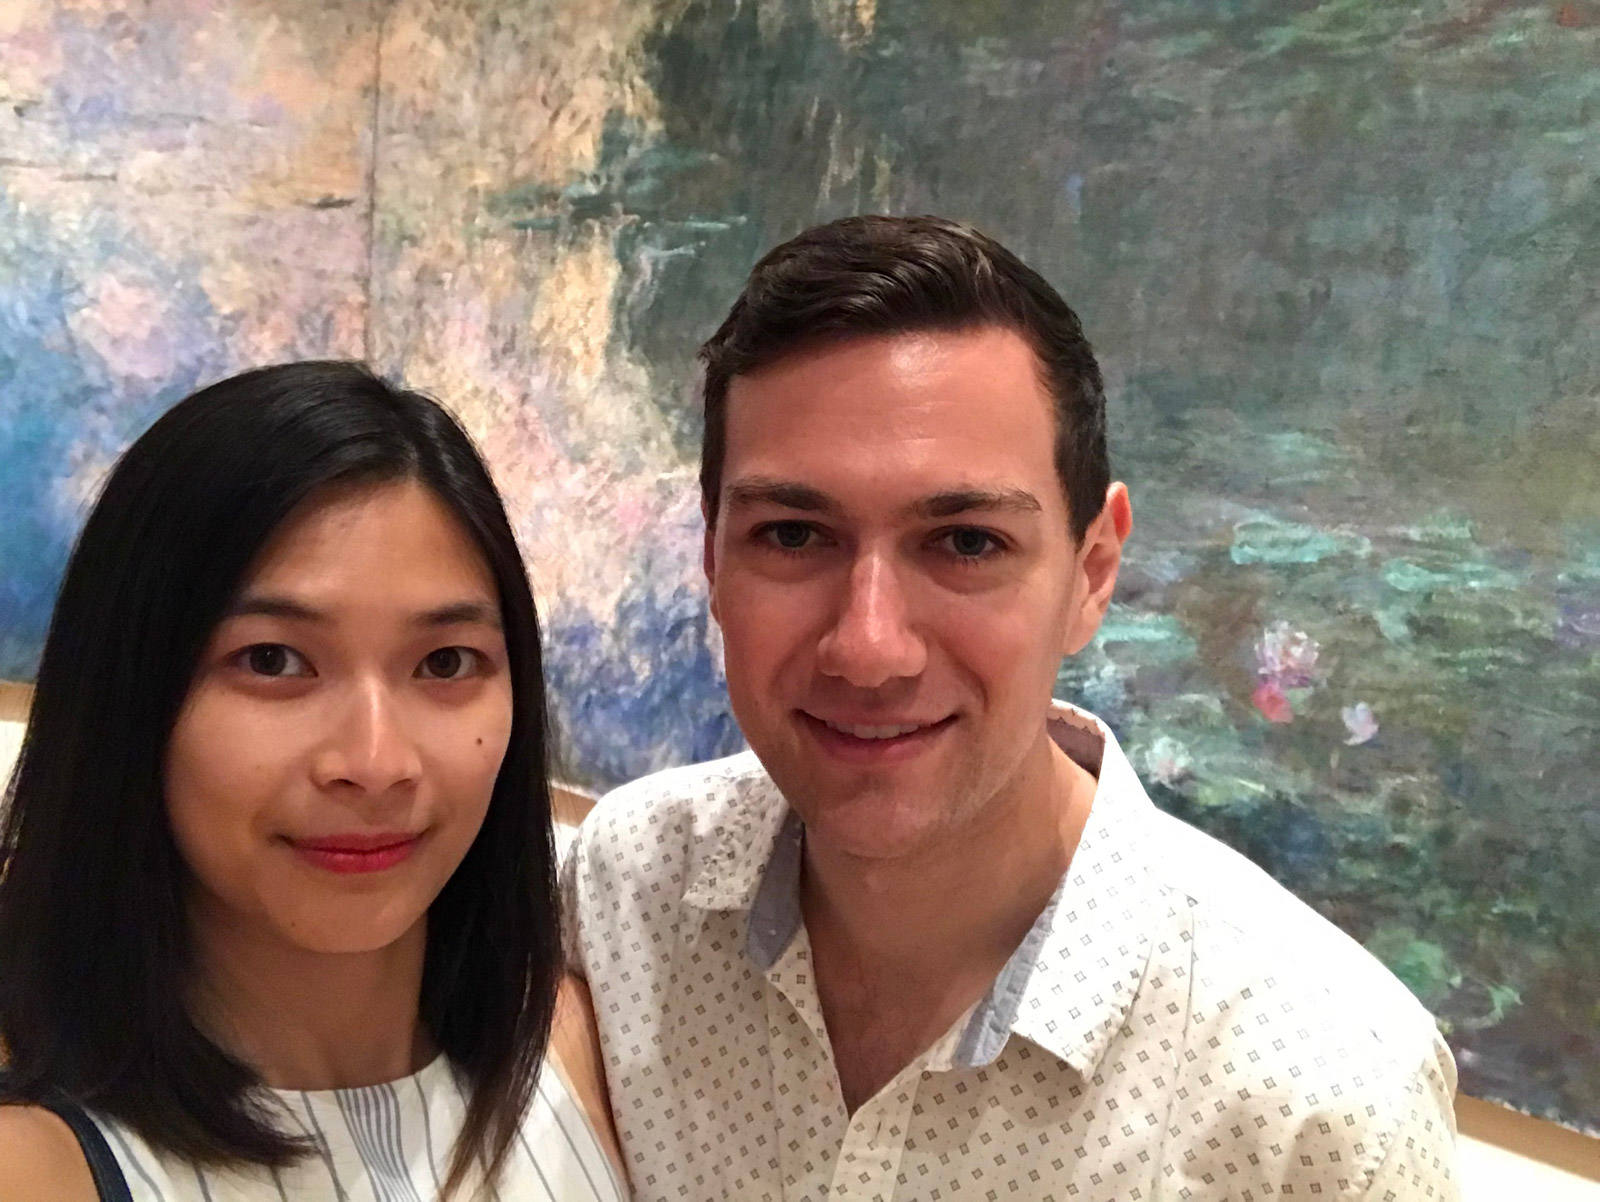 A man and woman, smiling, with a mural painting of water lilies behind them